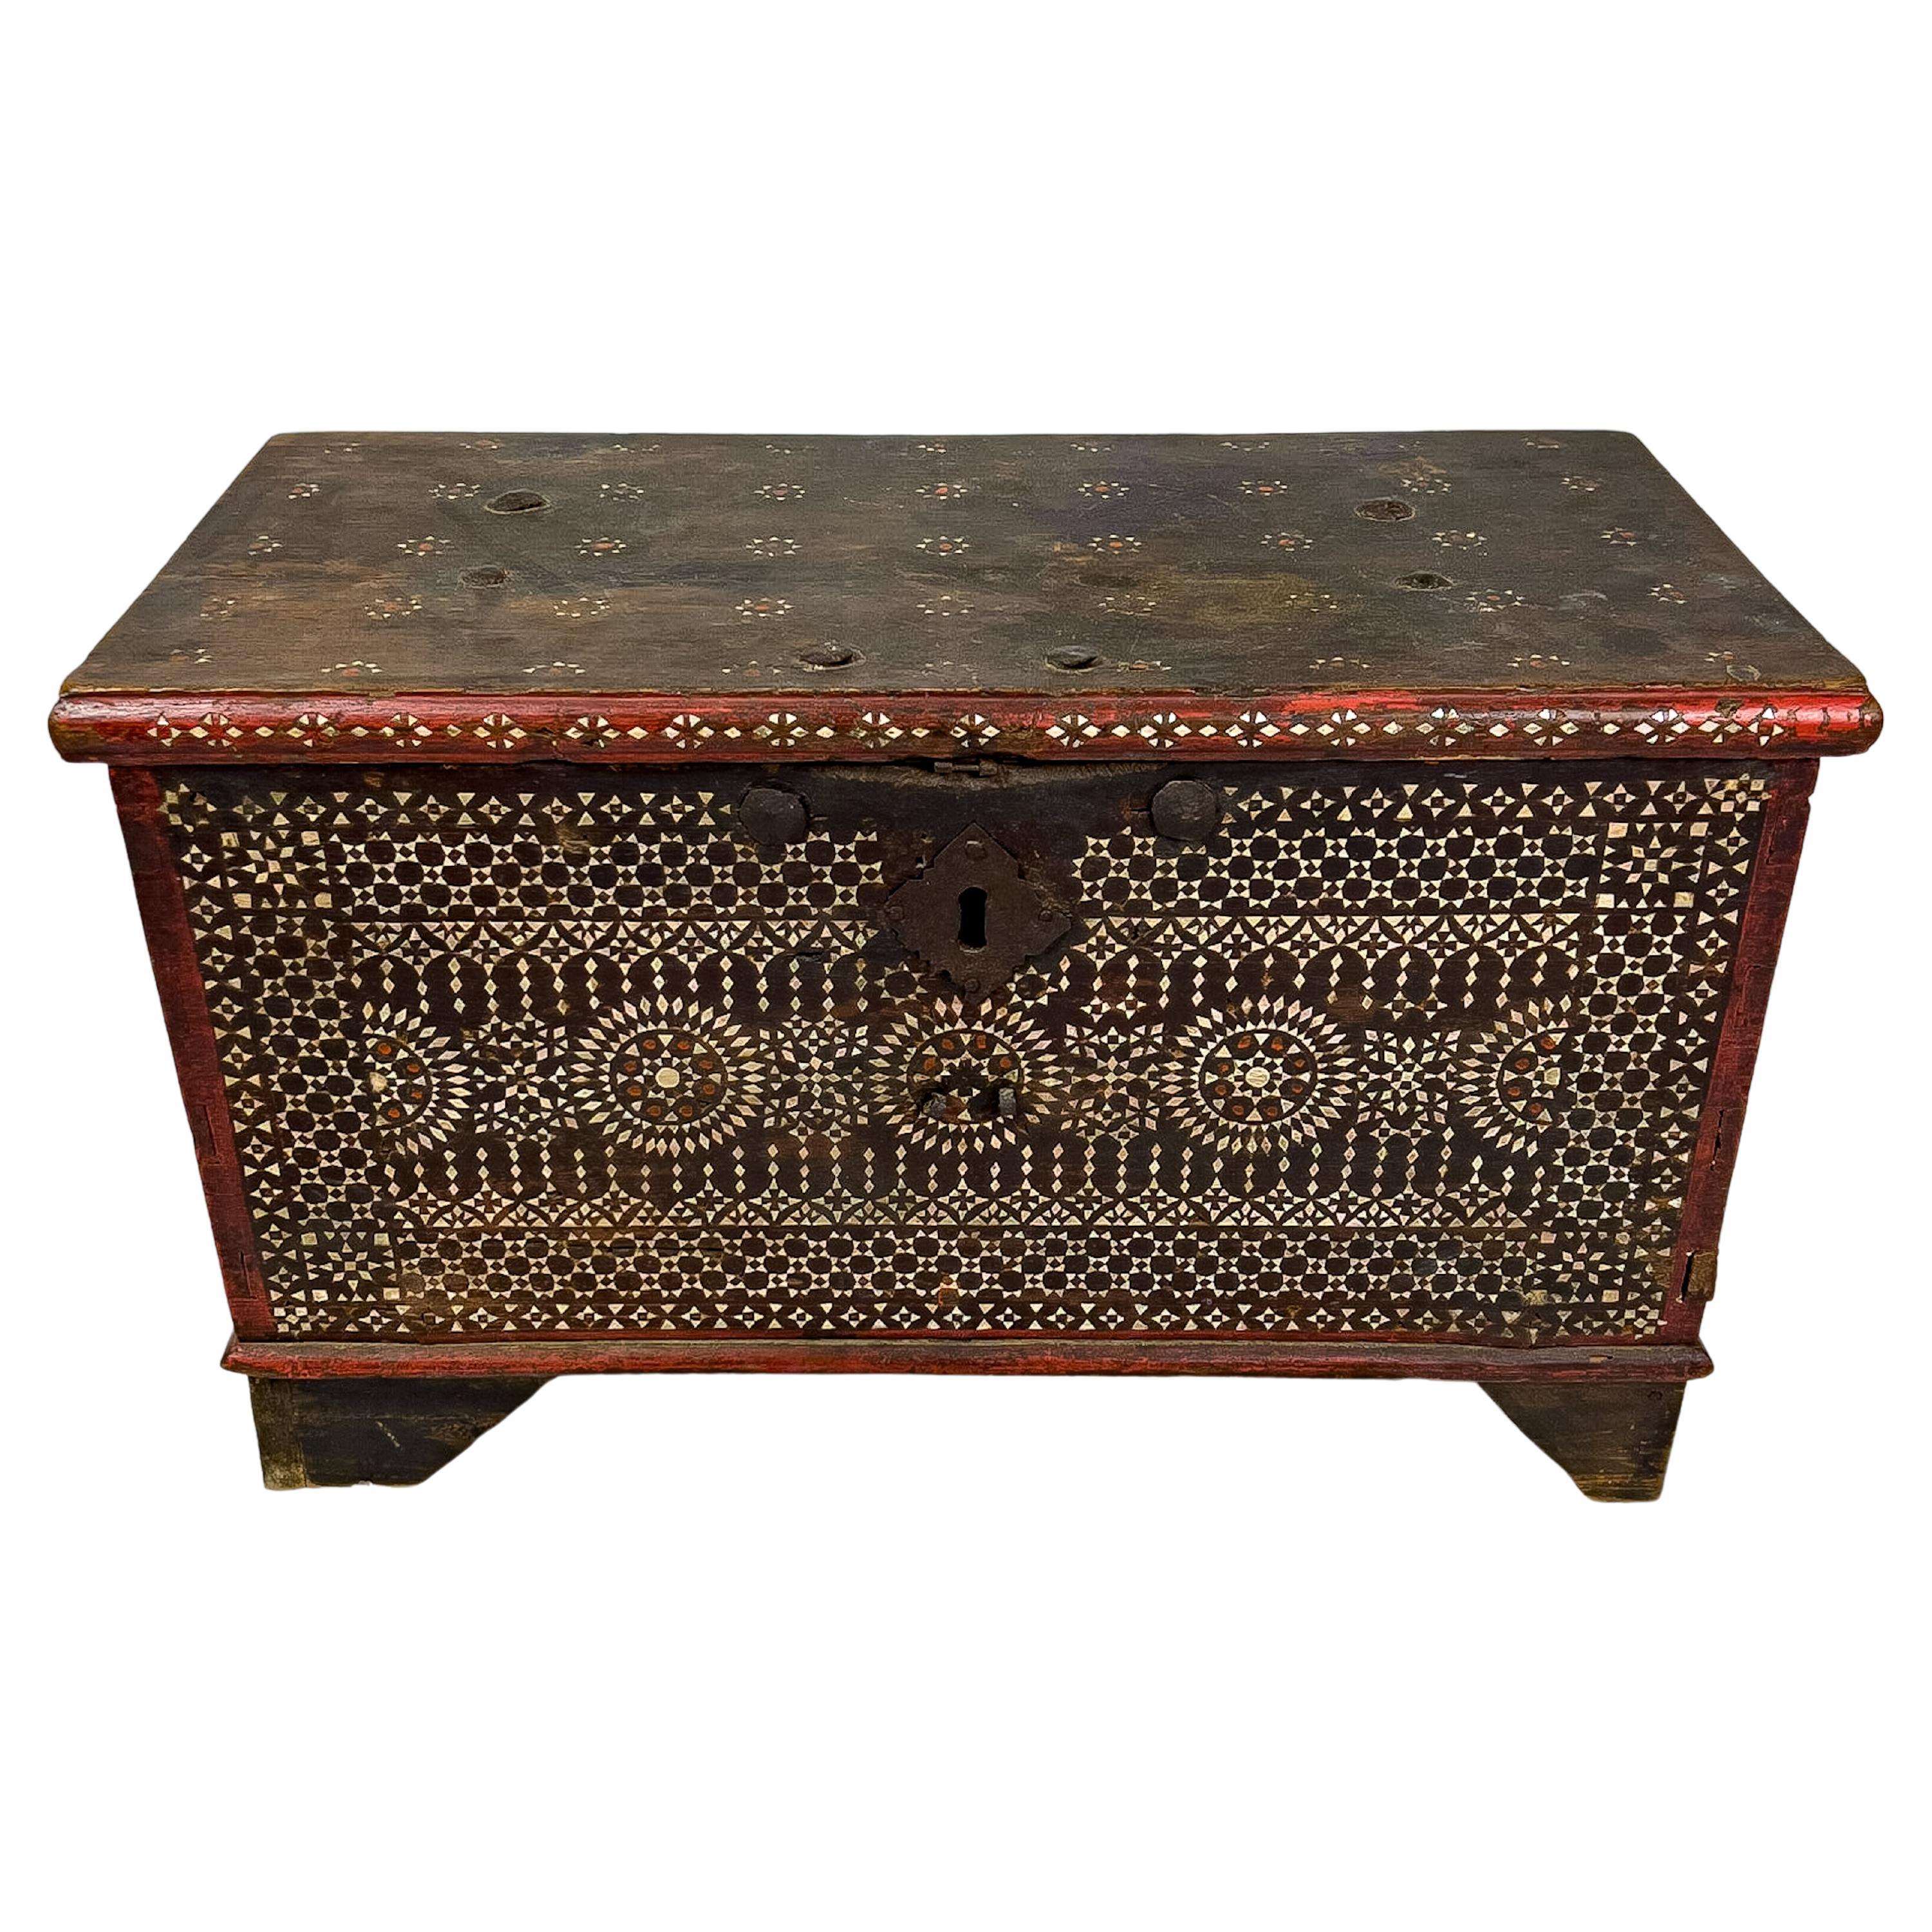 20th Century Indonesian Wooden Blanket Chest with Mother of Pearl Inlay